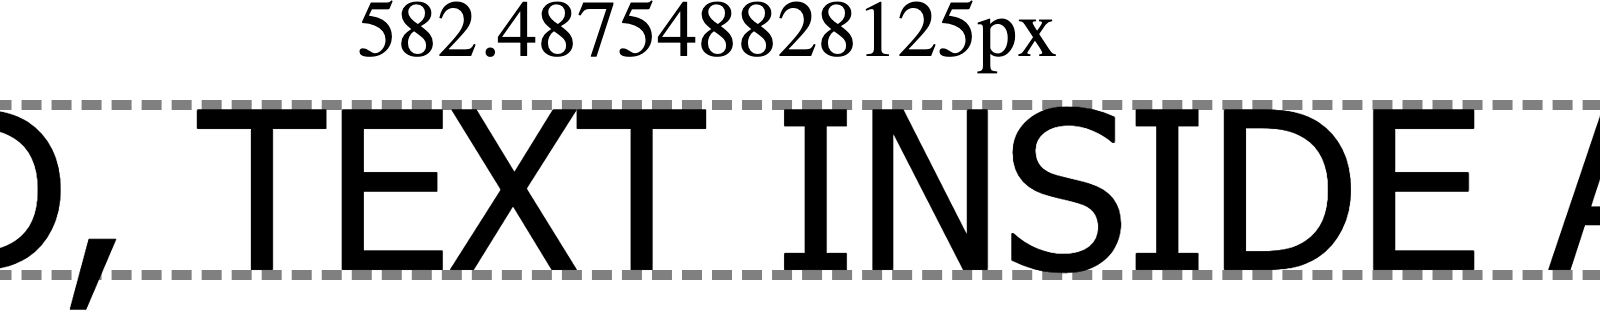 Text “BEHOLD, TEXT INSIDE A BOX” inside a grey dotted box tightly surrounding the text. Width and height in pixels are above and to the right of the box.